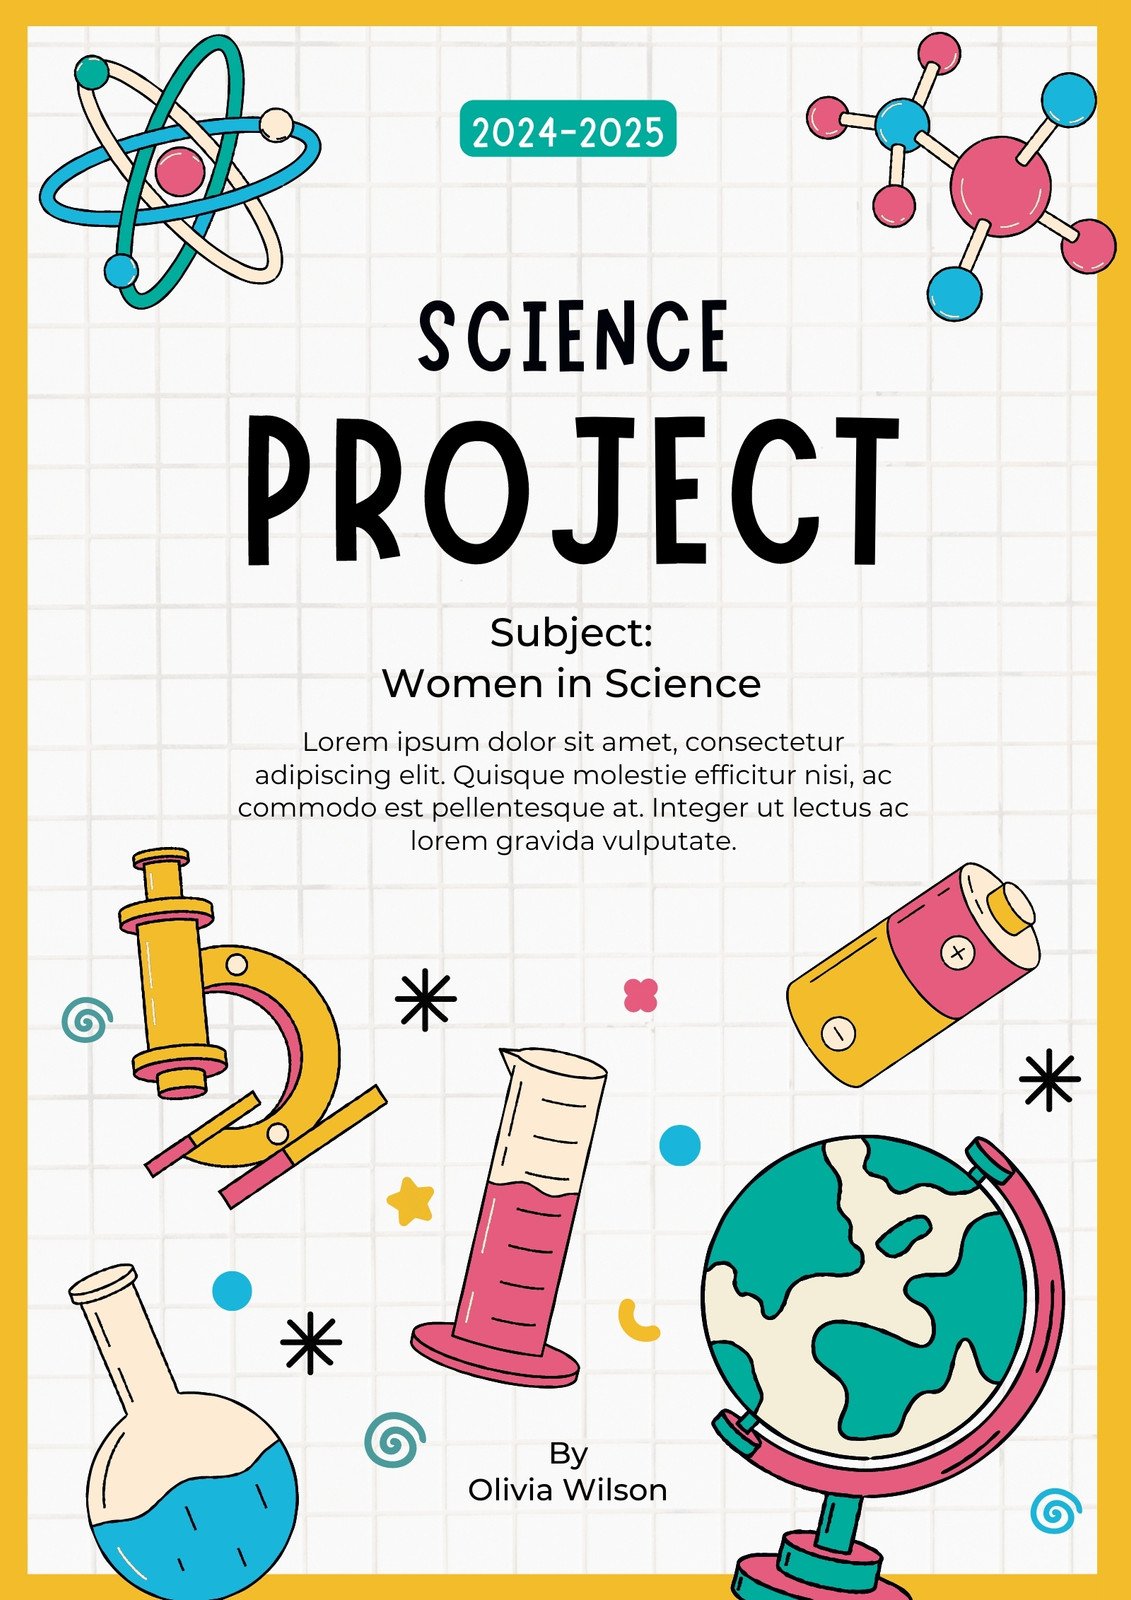 Customize 31+ Science Cover Page Templates Online - Canva